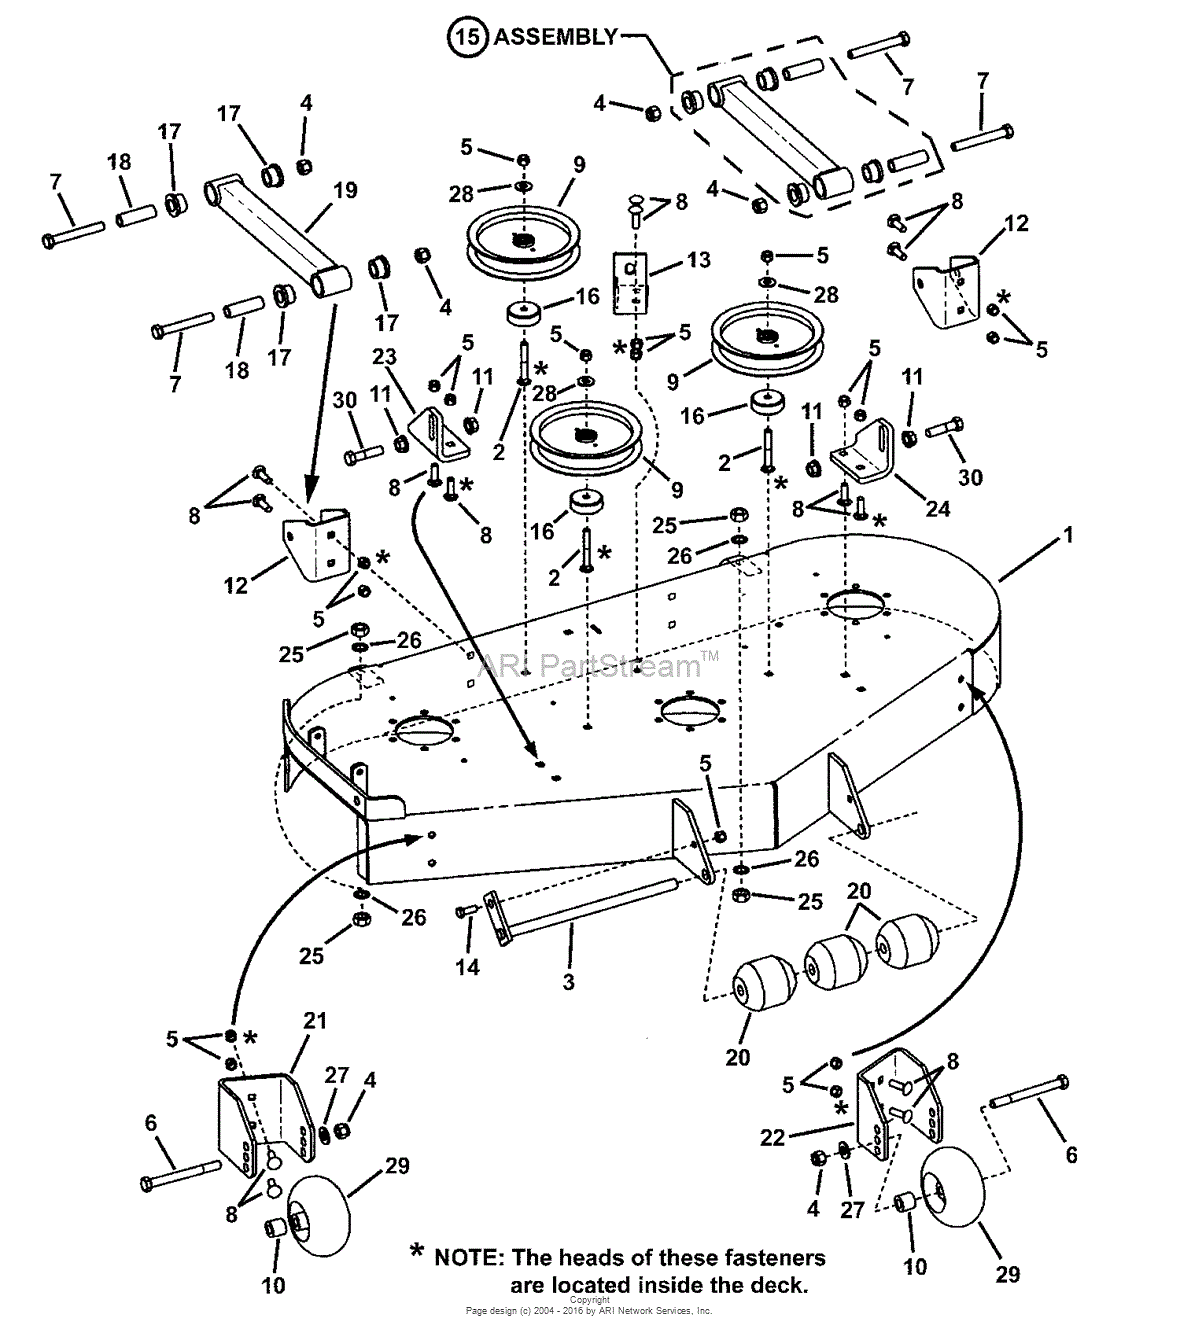 Diagrams Wiring   Scag Wiring Harness